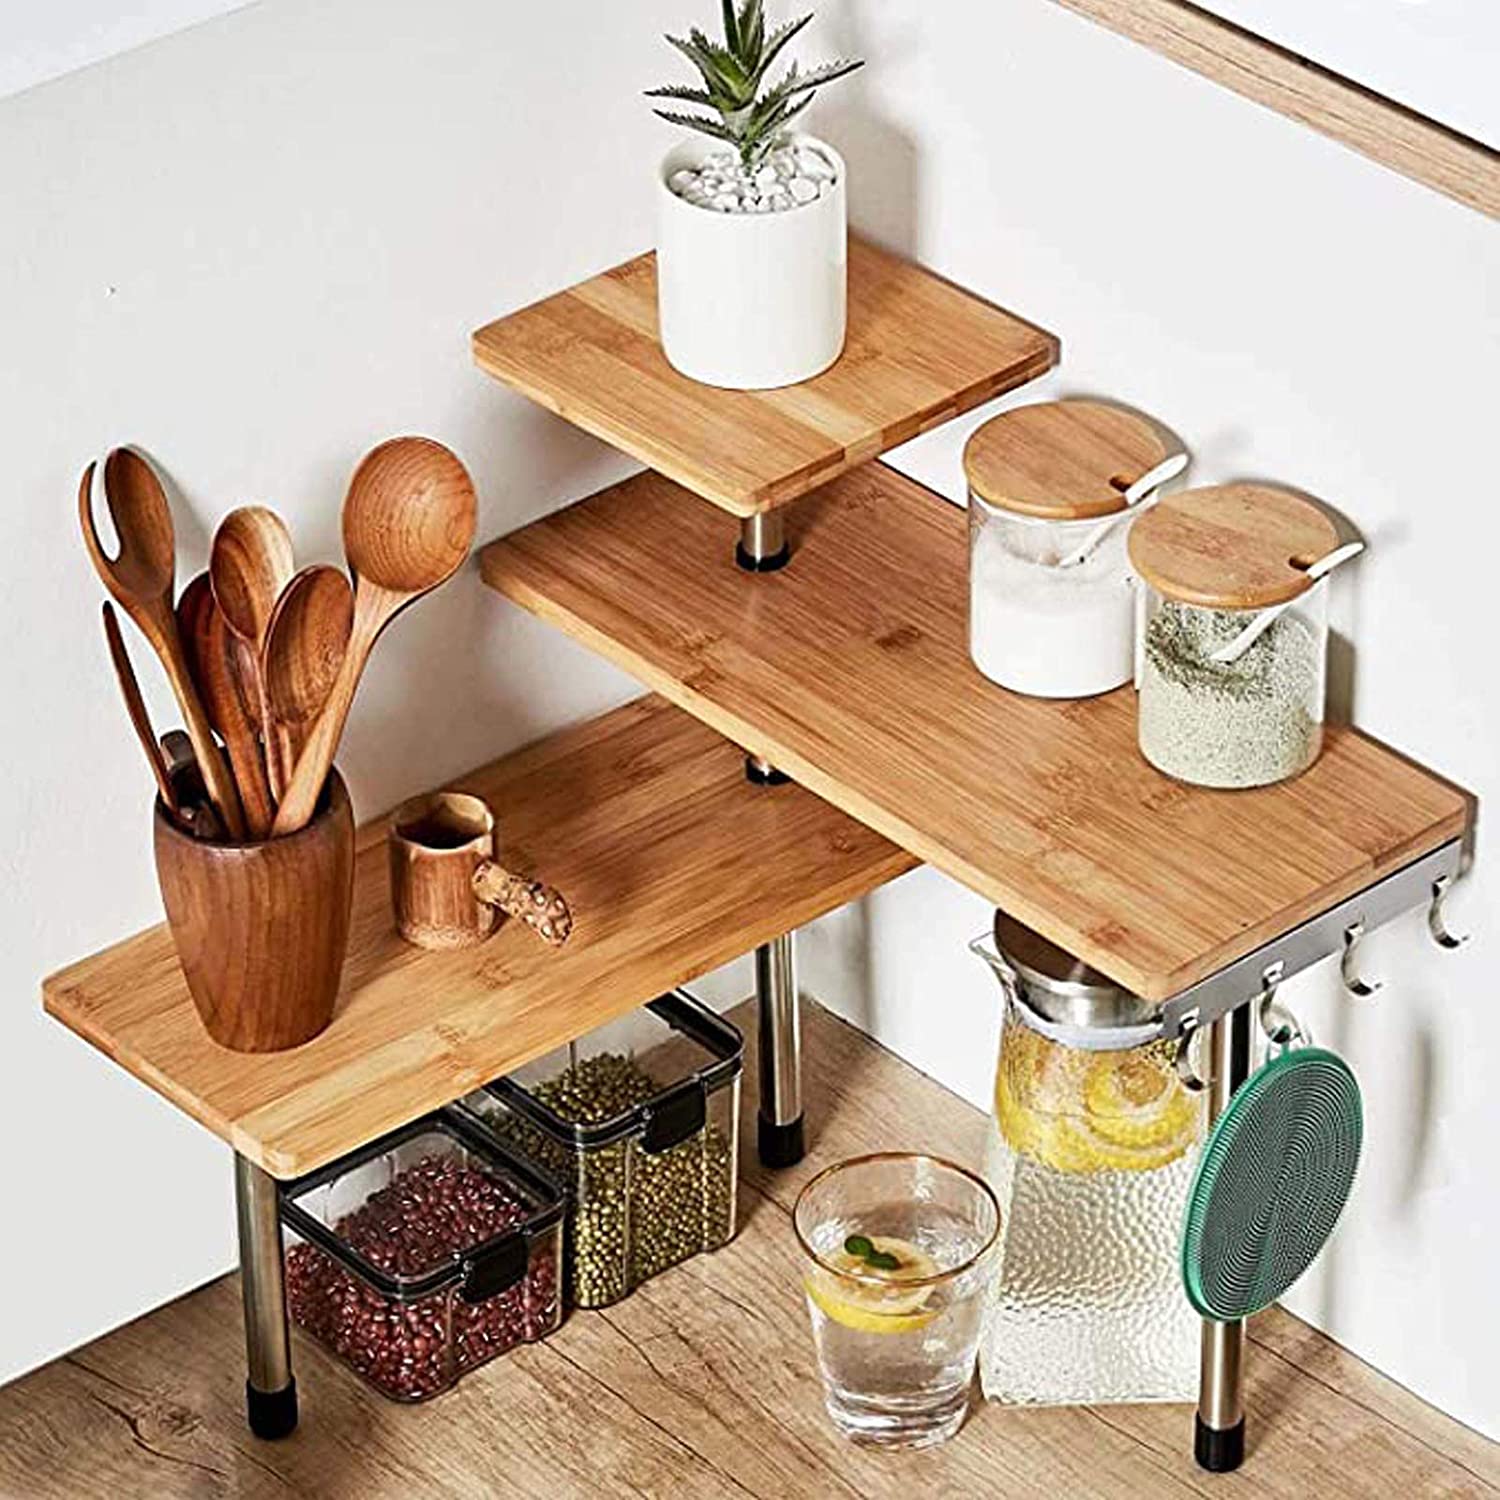 HYNAWIN 3 Tier Corner Shelf Bamboo & Metal Storage Spice Rack Furniture for Small Spaces